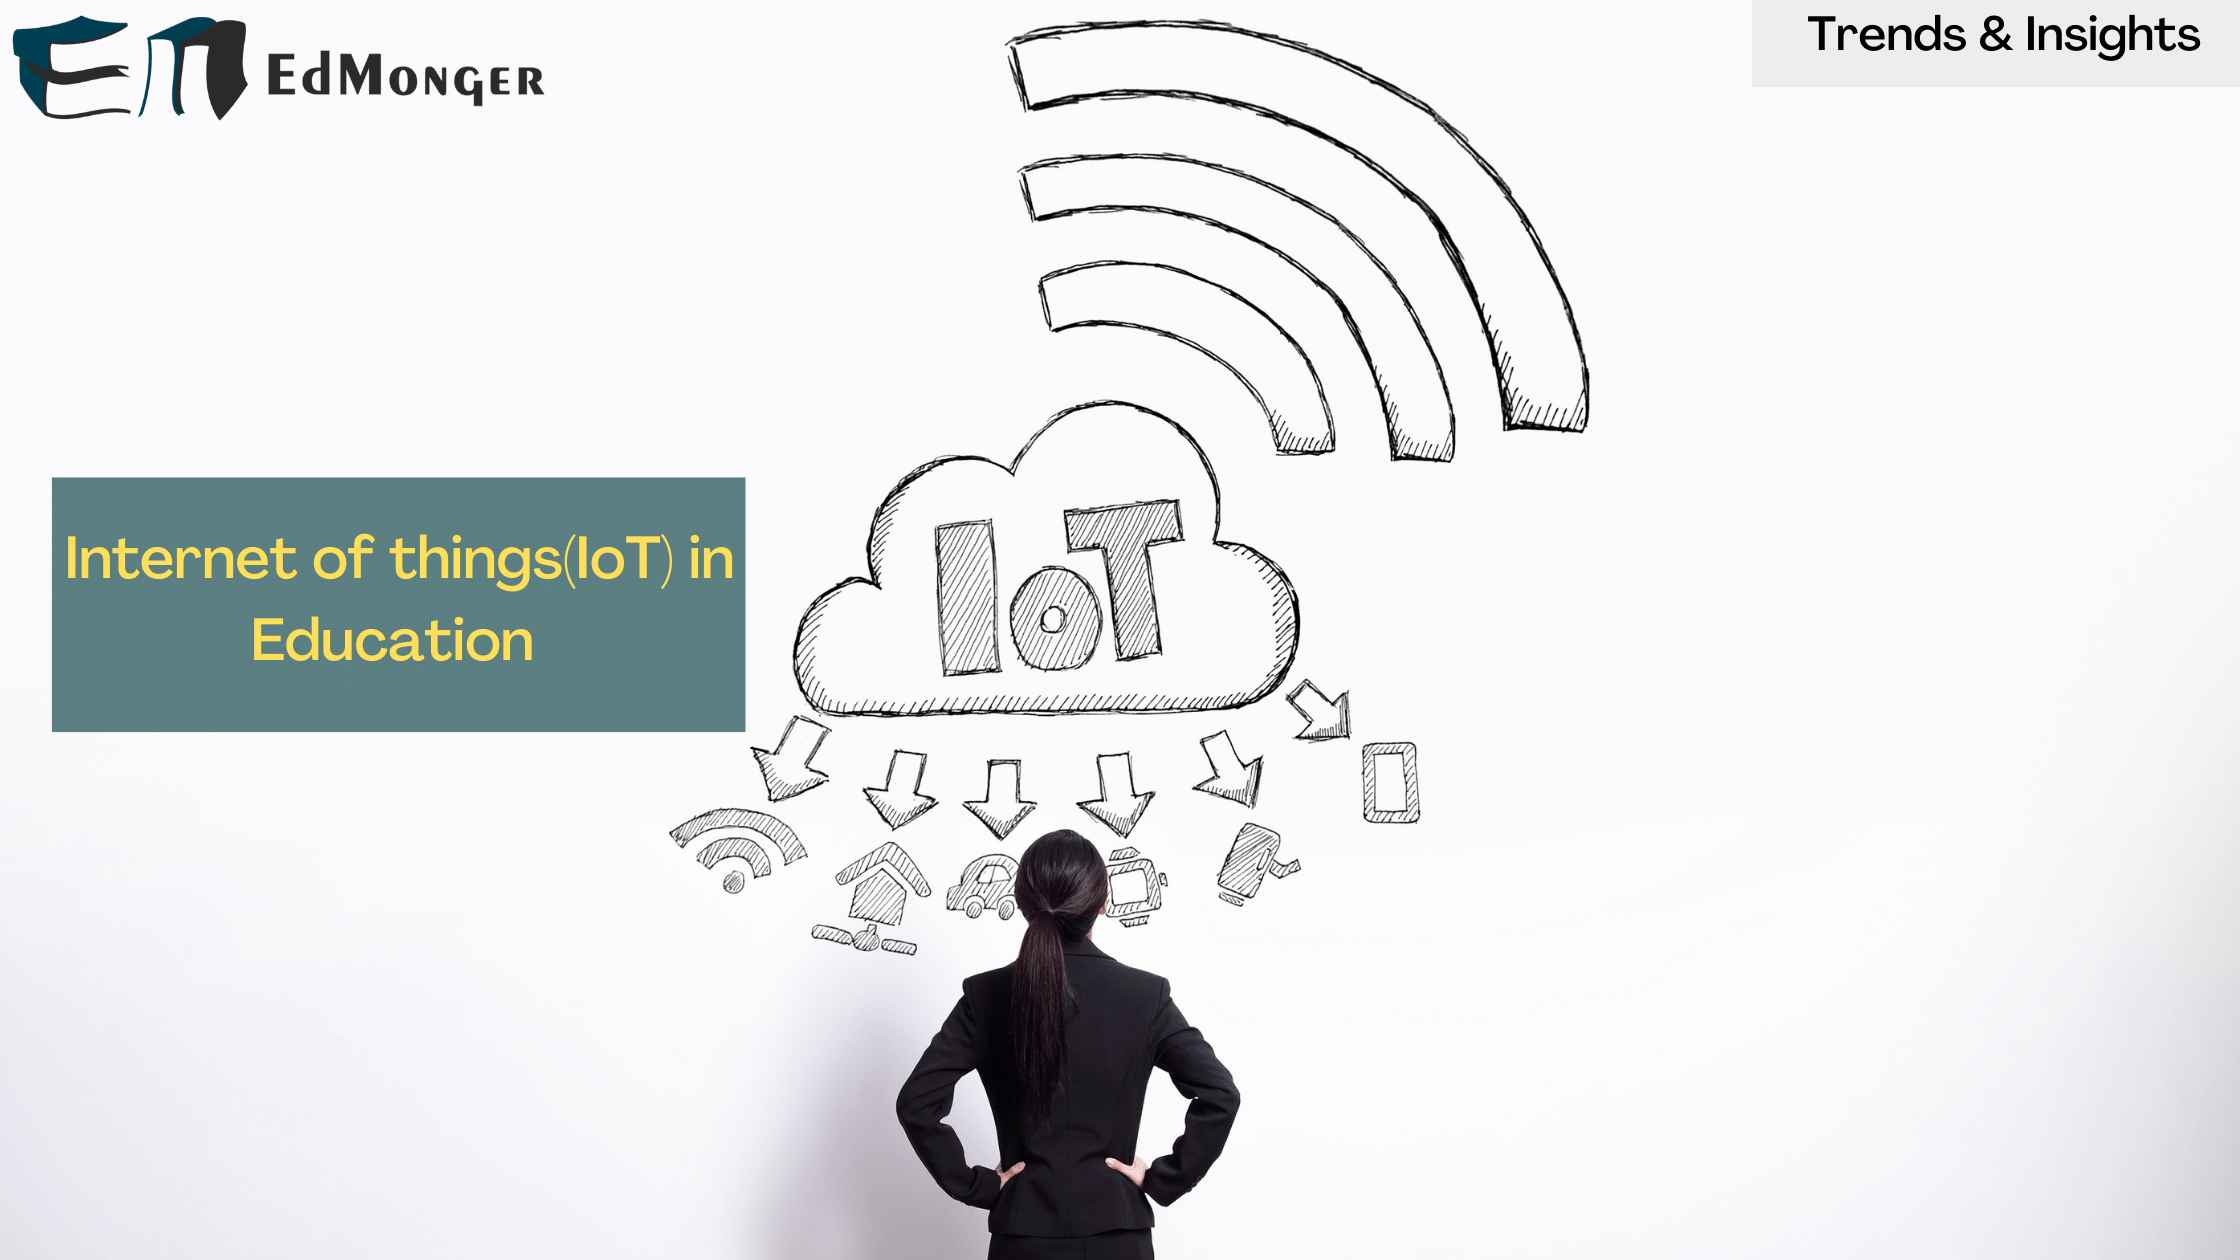 Internet of things(IoT) in education